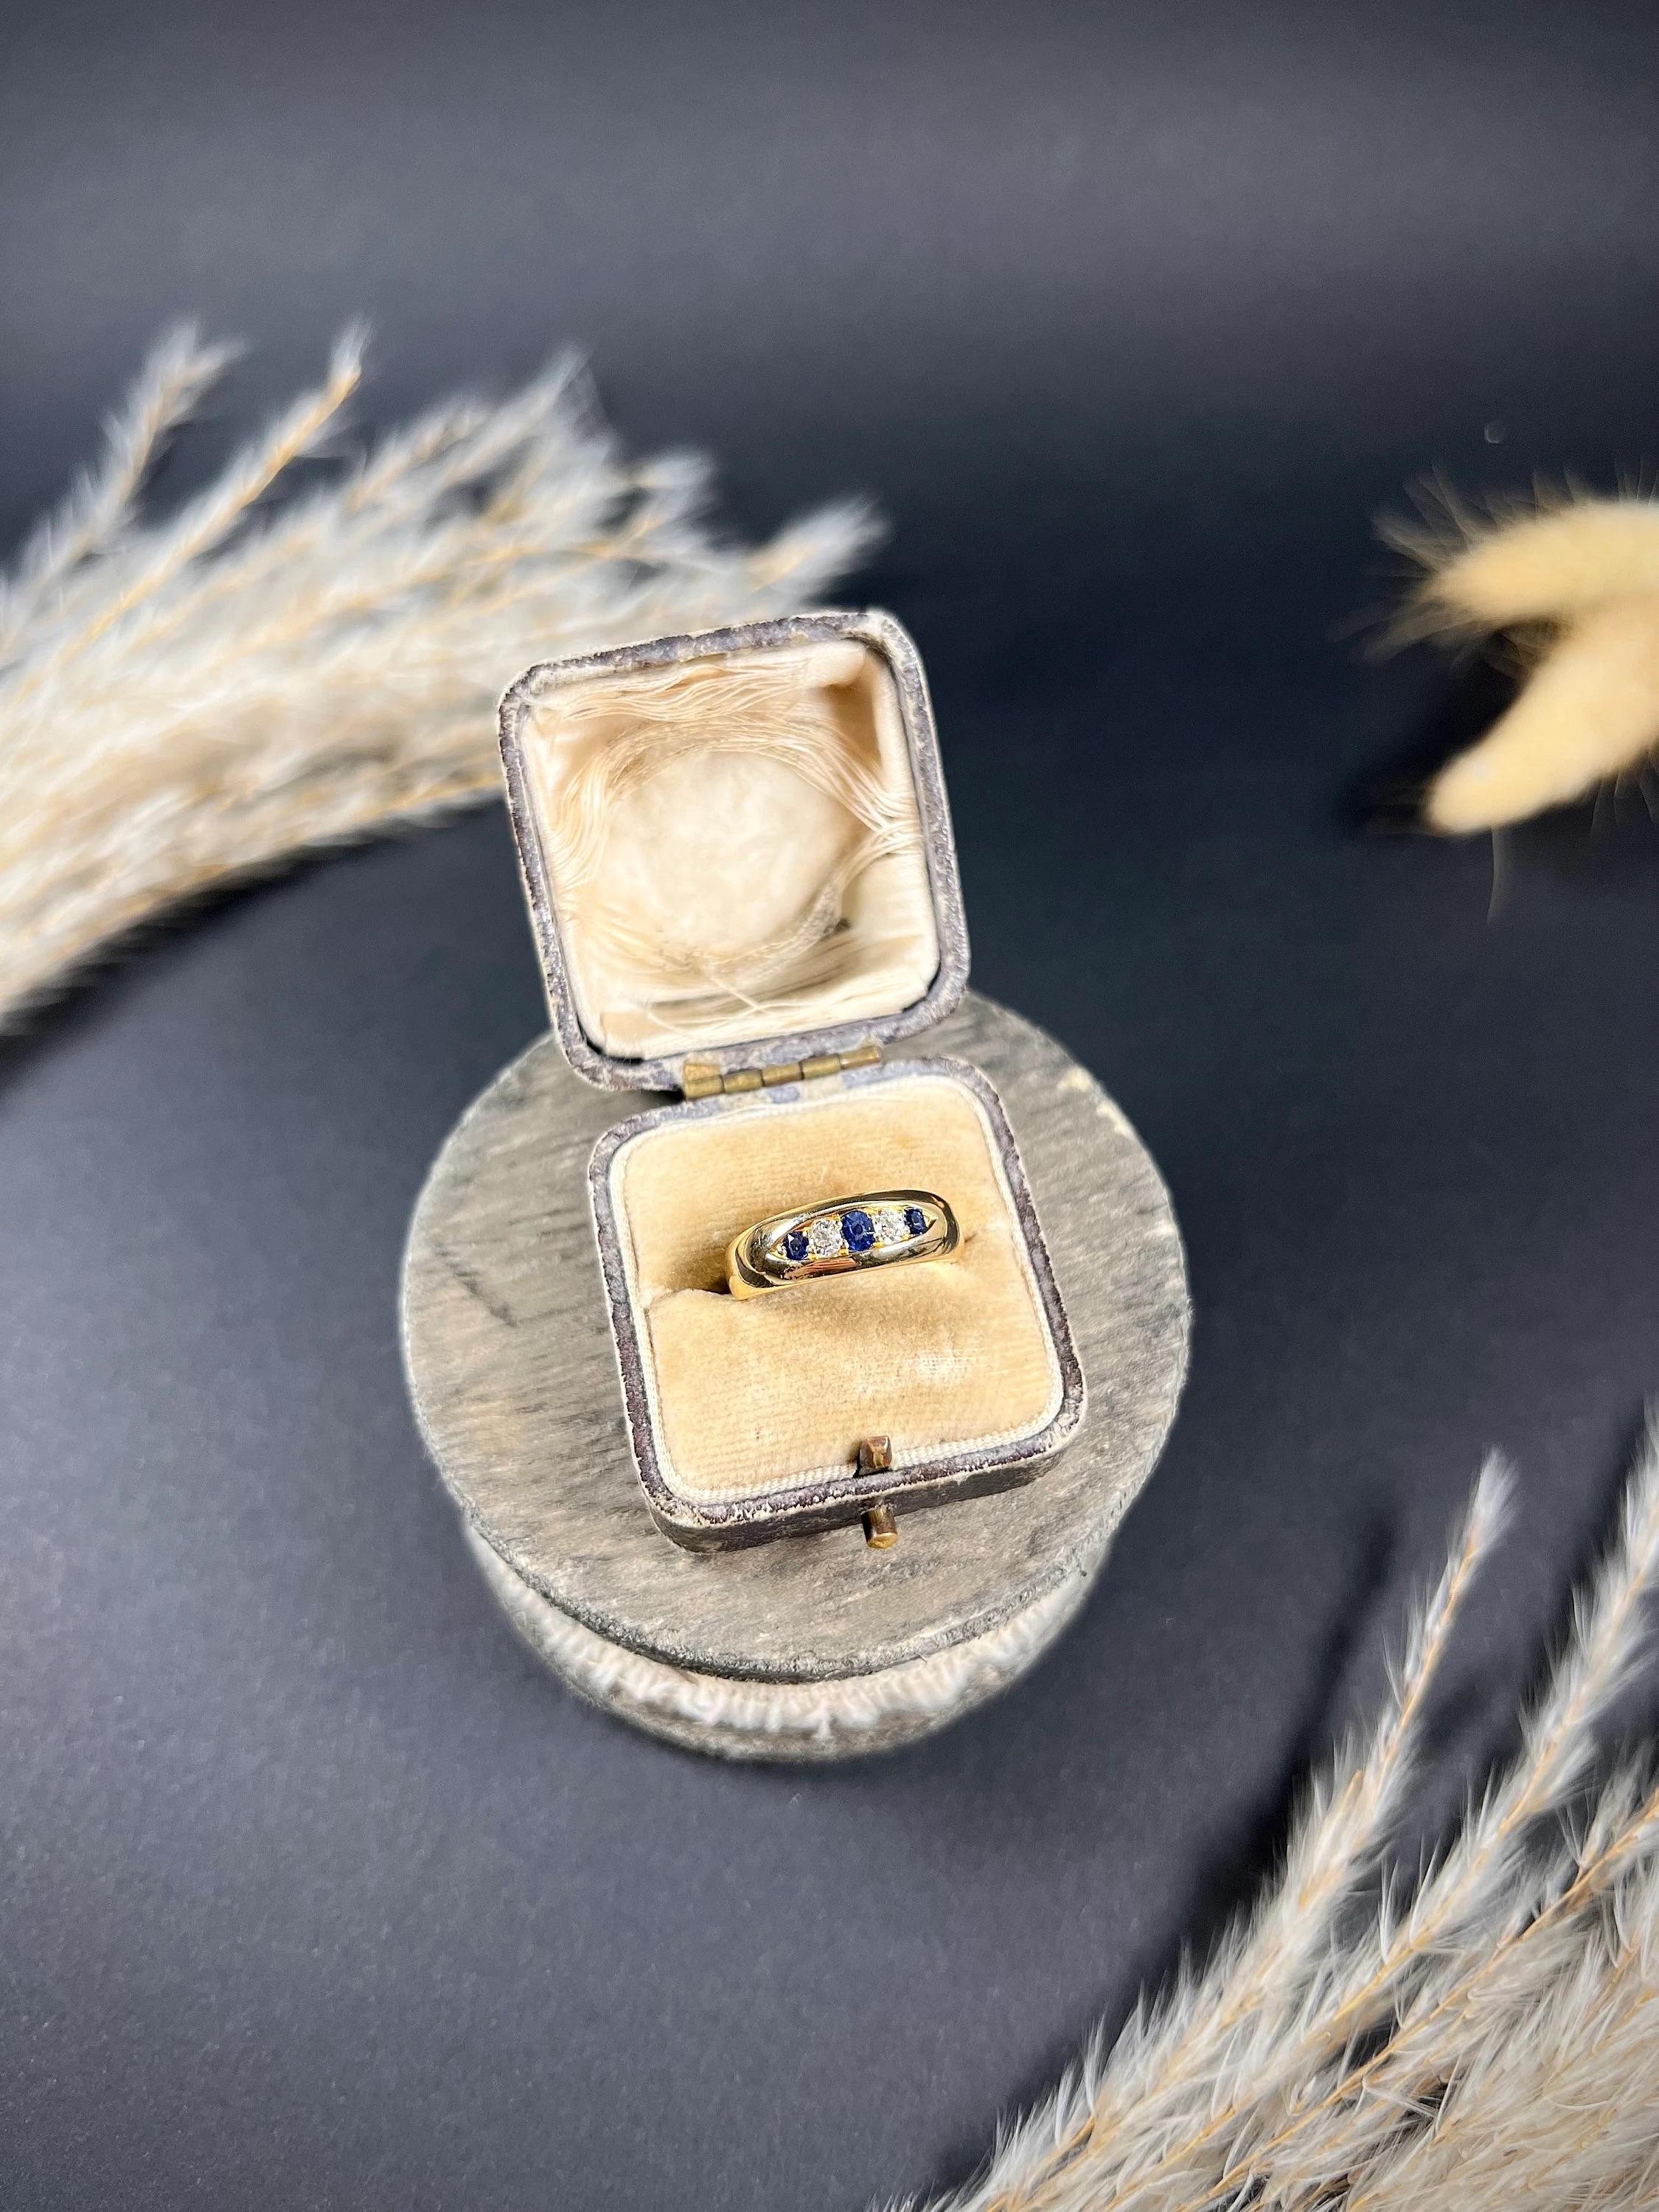 Antique Sapphire and Diamond Ring 

18ct Gold Stamped 

Hallmarked Birmingham 1891

This stunning Victorian 18ct yellow gold five-stone ring is a true work of art. The ring is set with a combination of natural sapphires and diamonds that create a